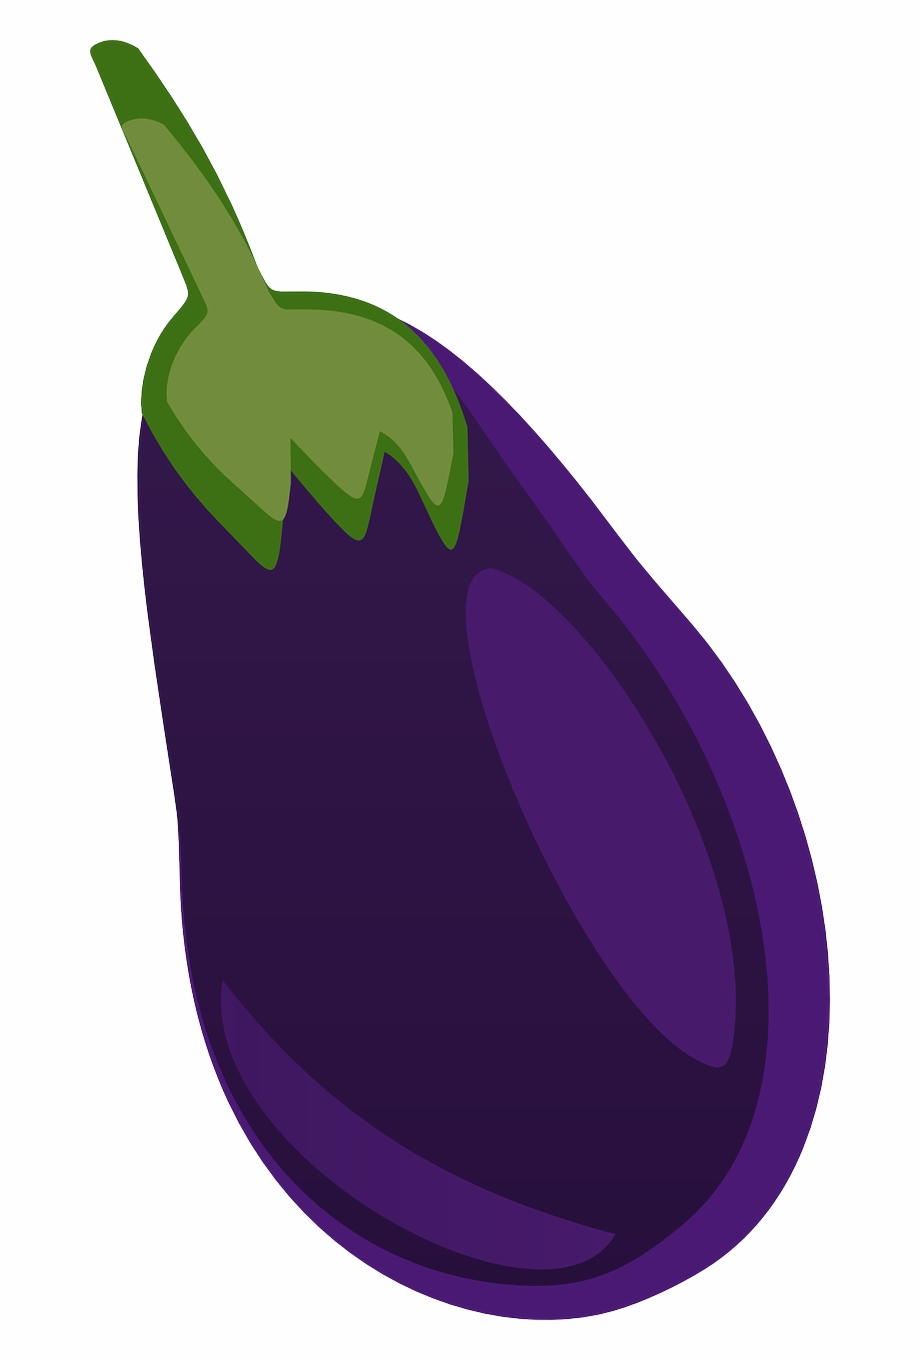 Eggplant Scroll Clipart And More